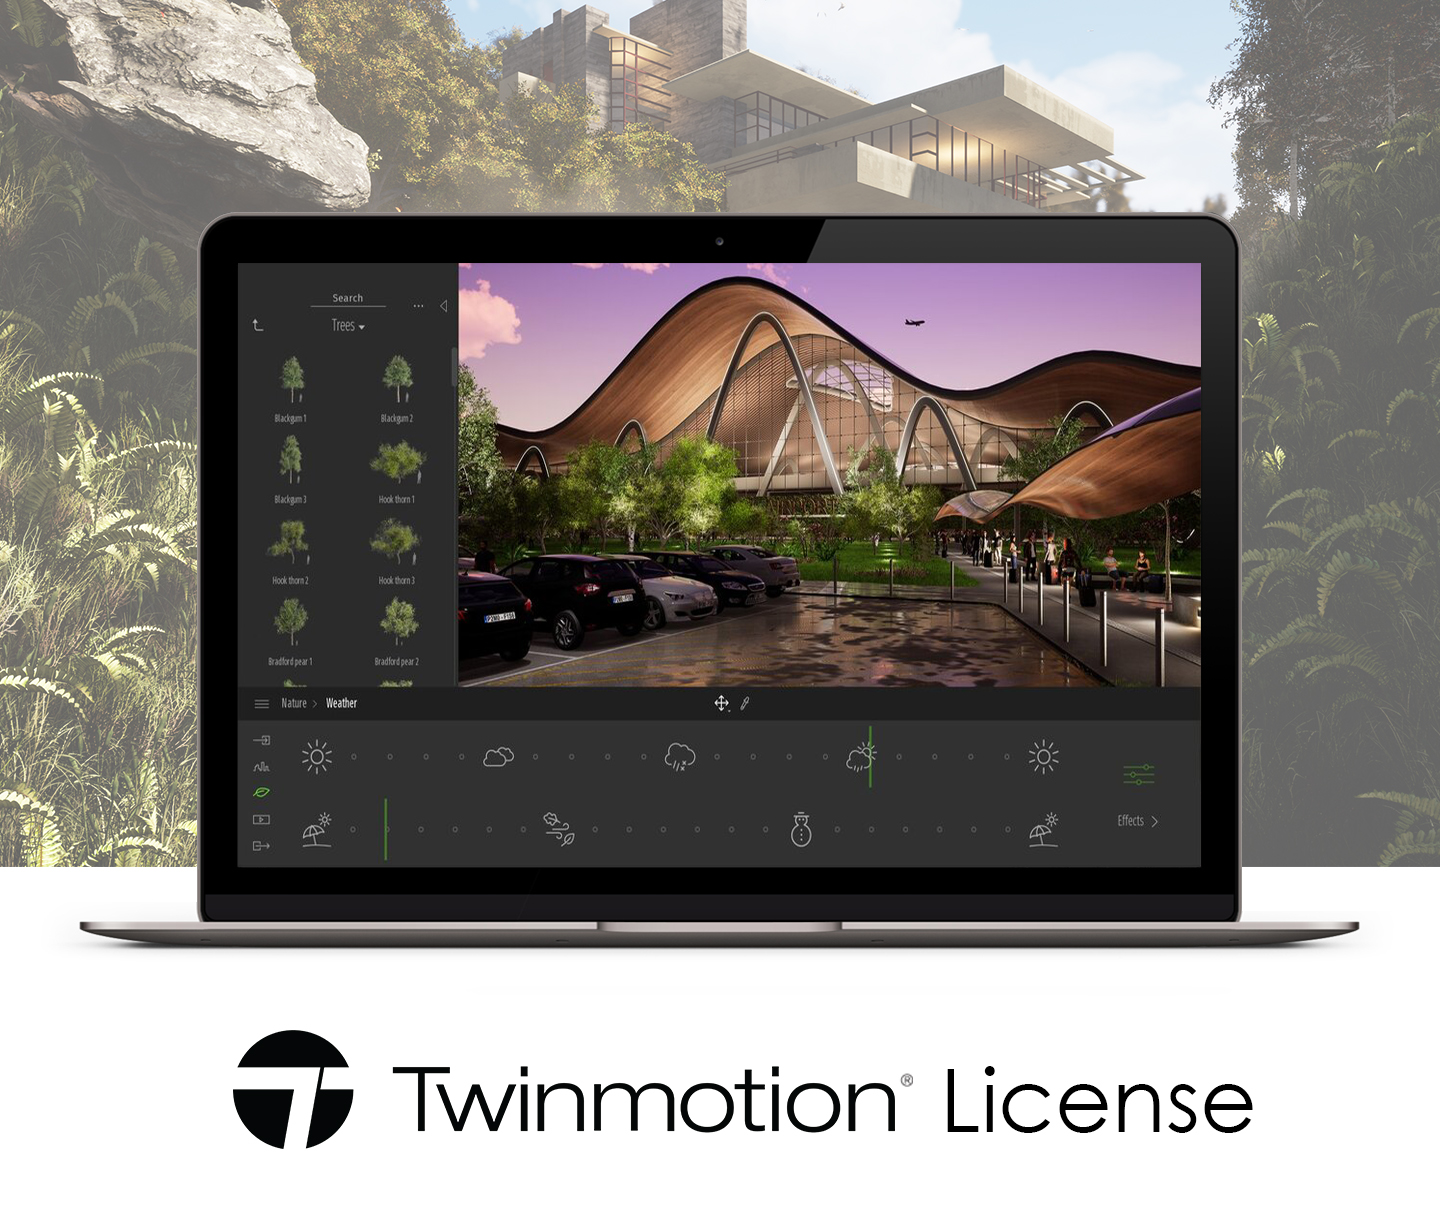 twinmotion 2022 system requirements